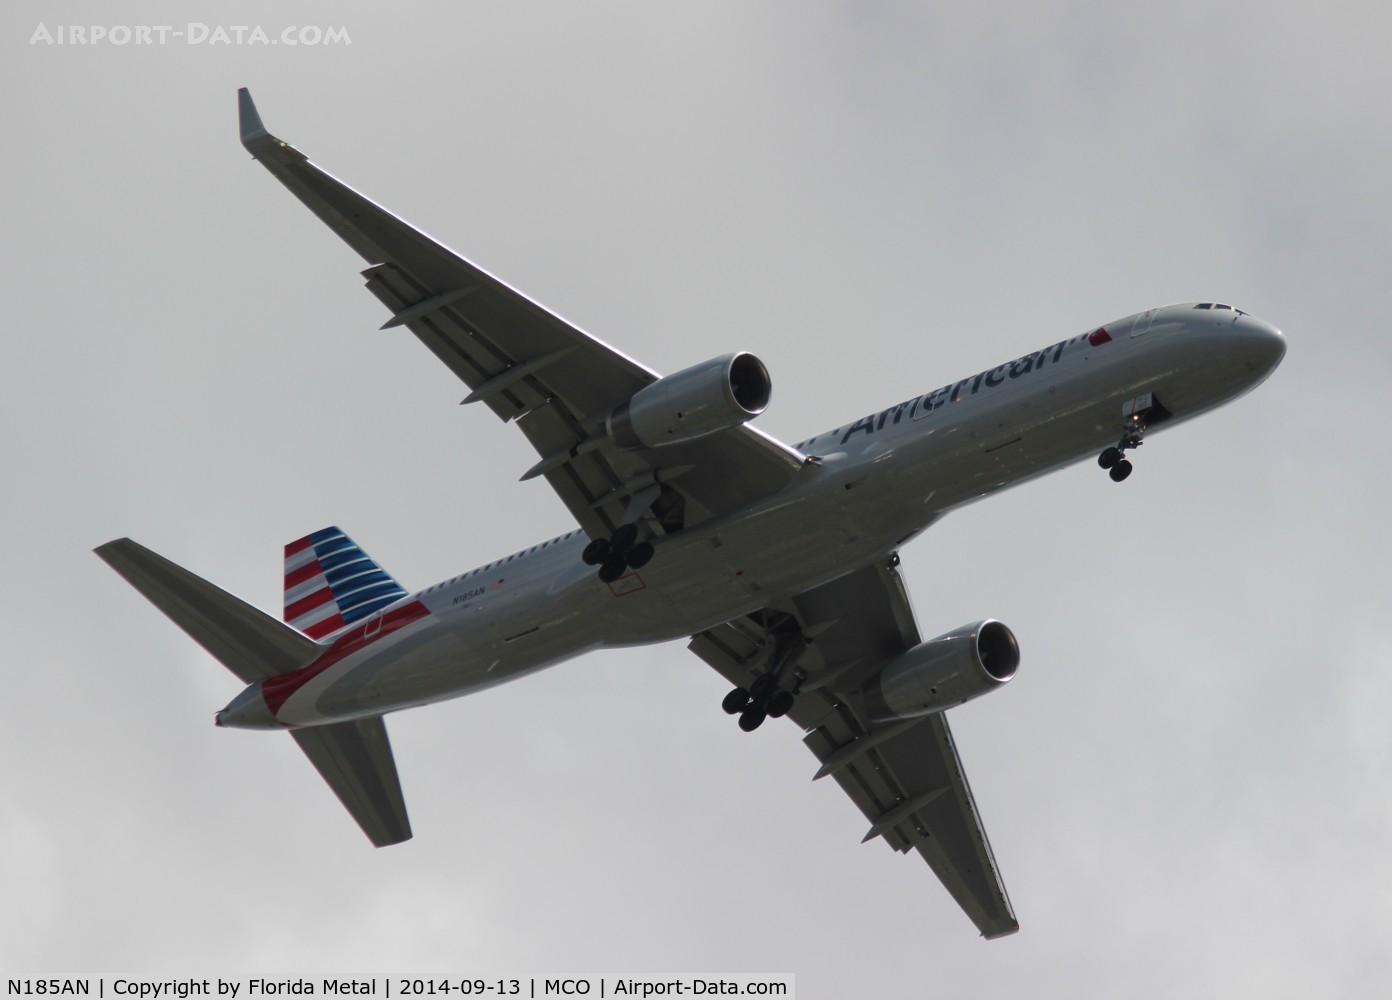 N185AN, 2001 Boeing 757-223 C/N 32379, American 757-200 first plane in the new colors